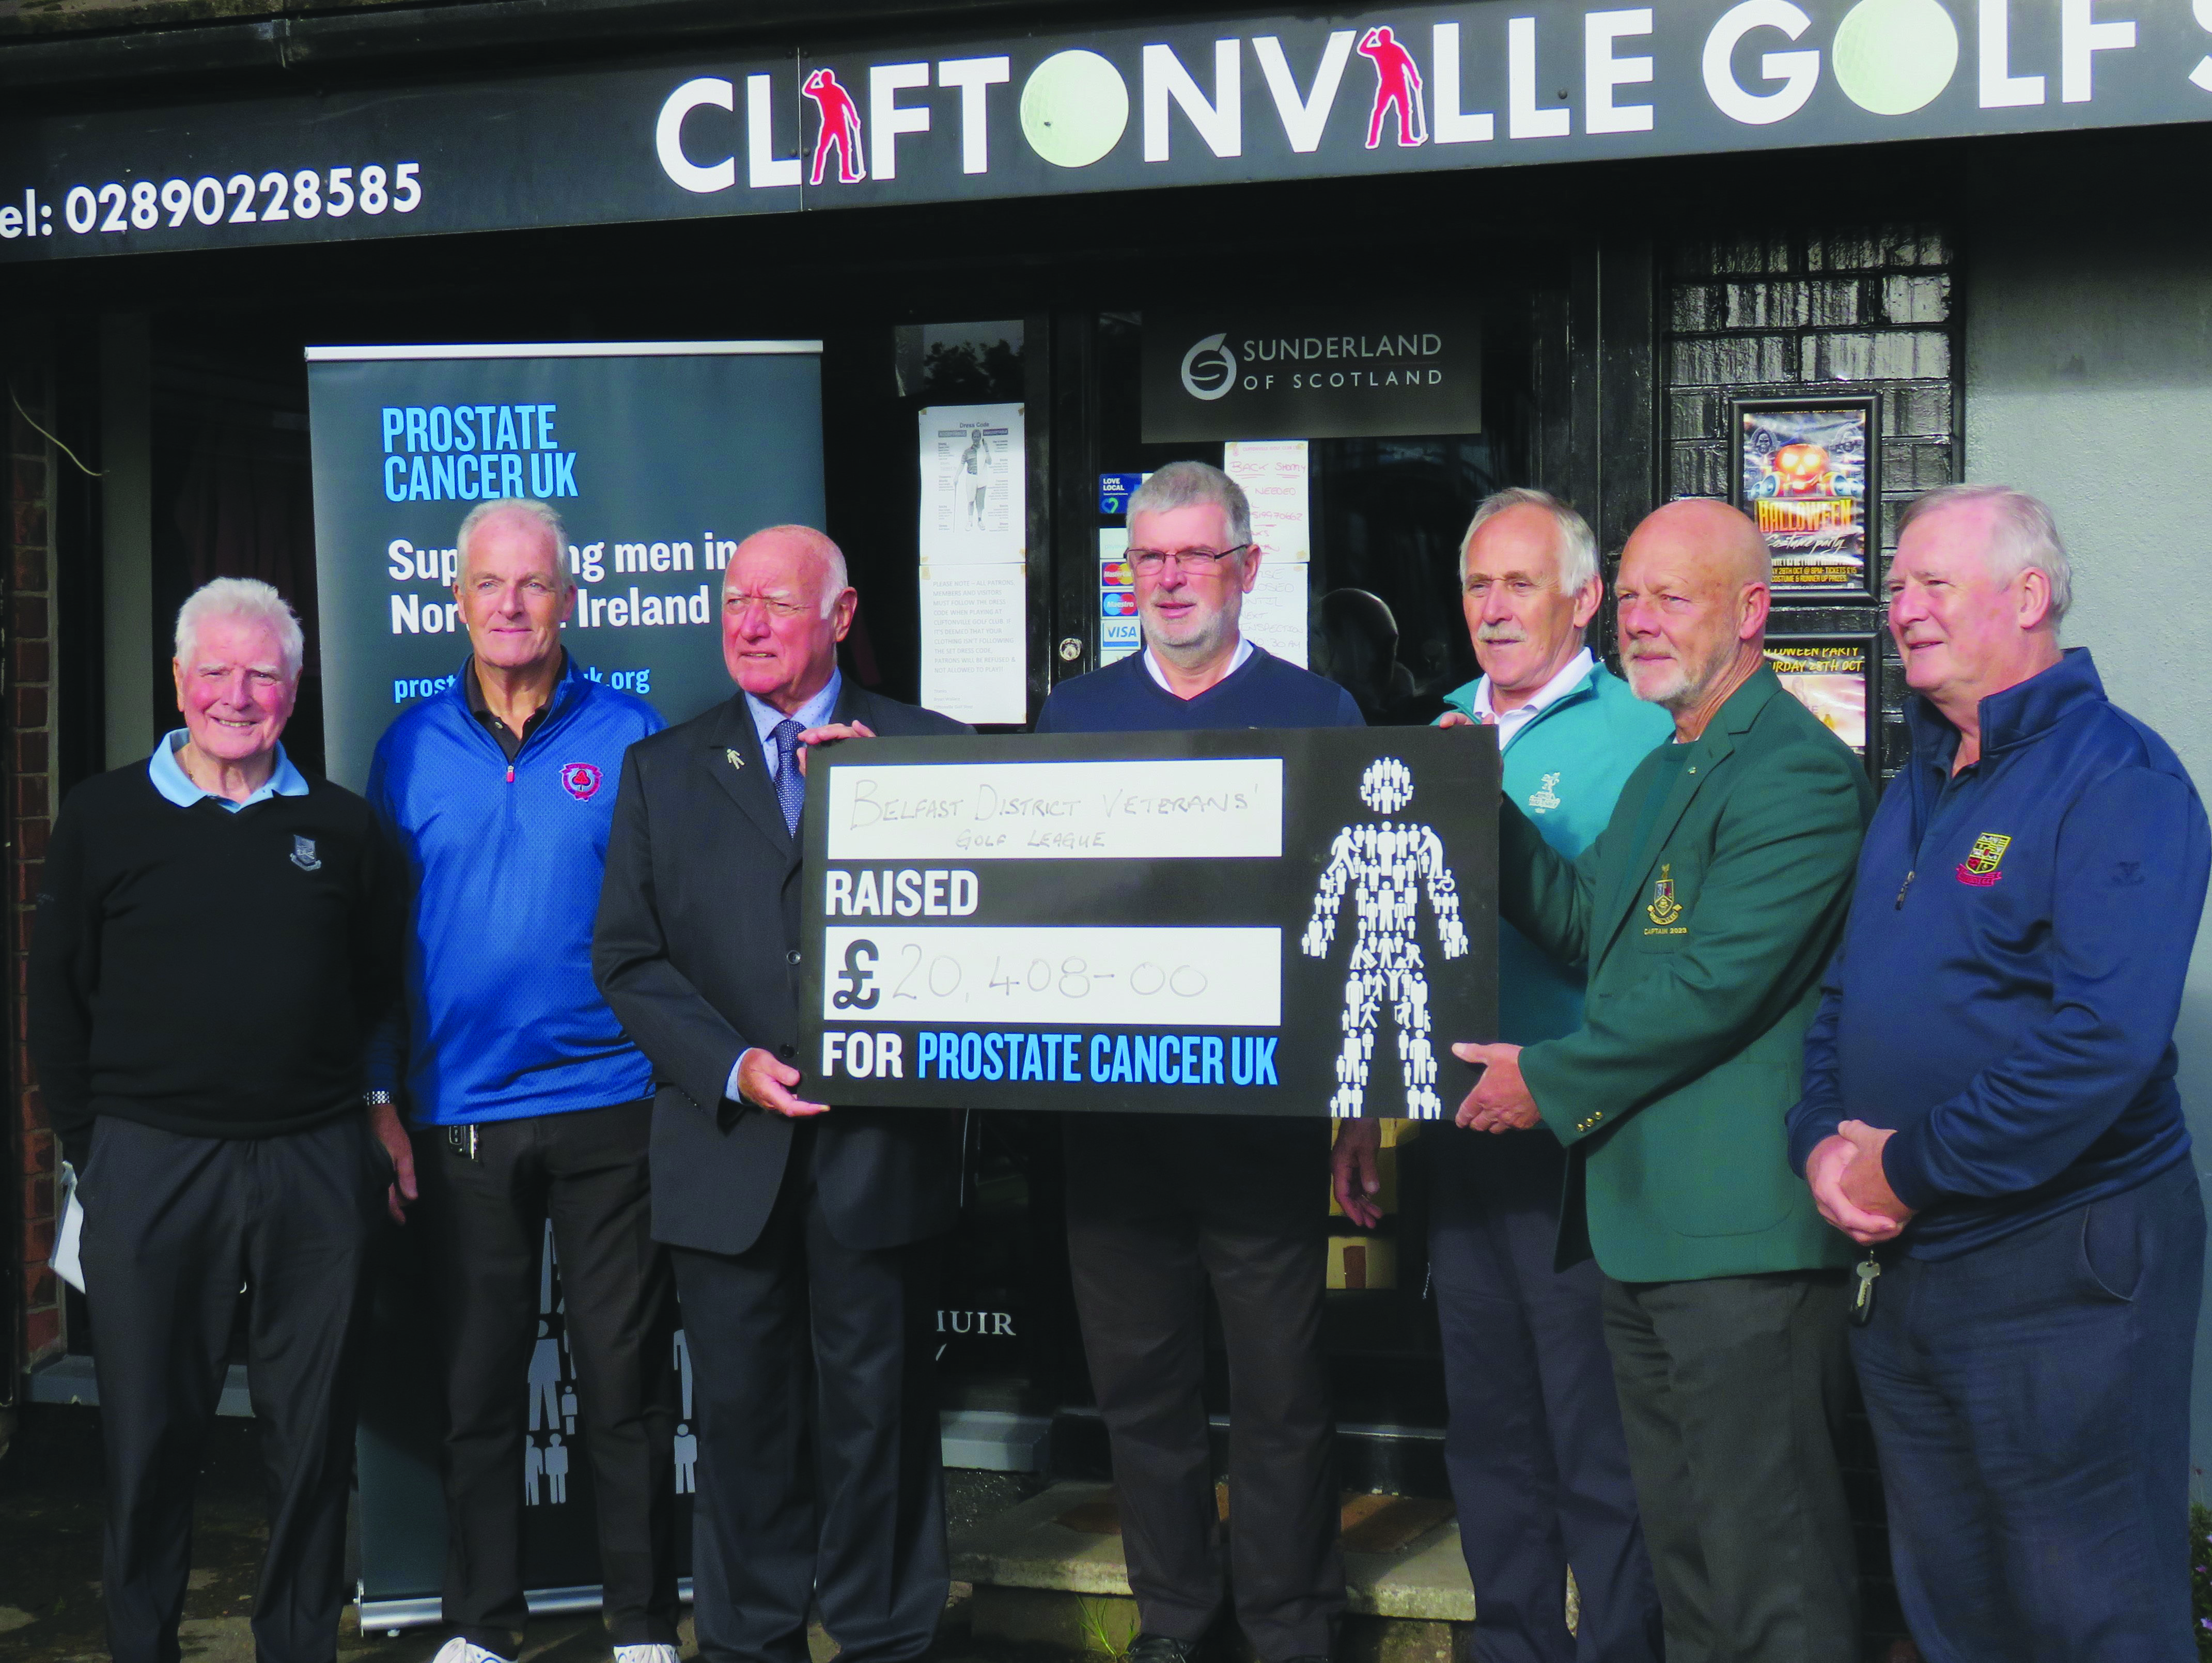 League members hand over a cheque for £20,408 to Prostate Cancer UK